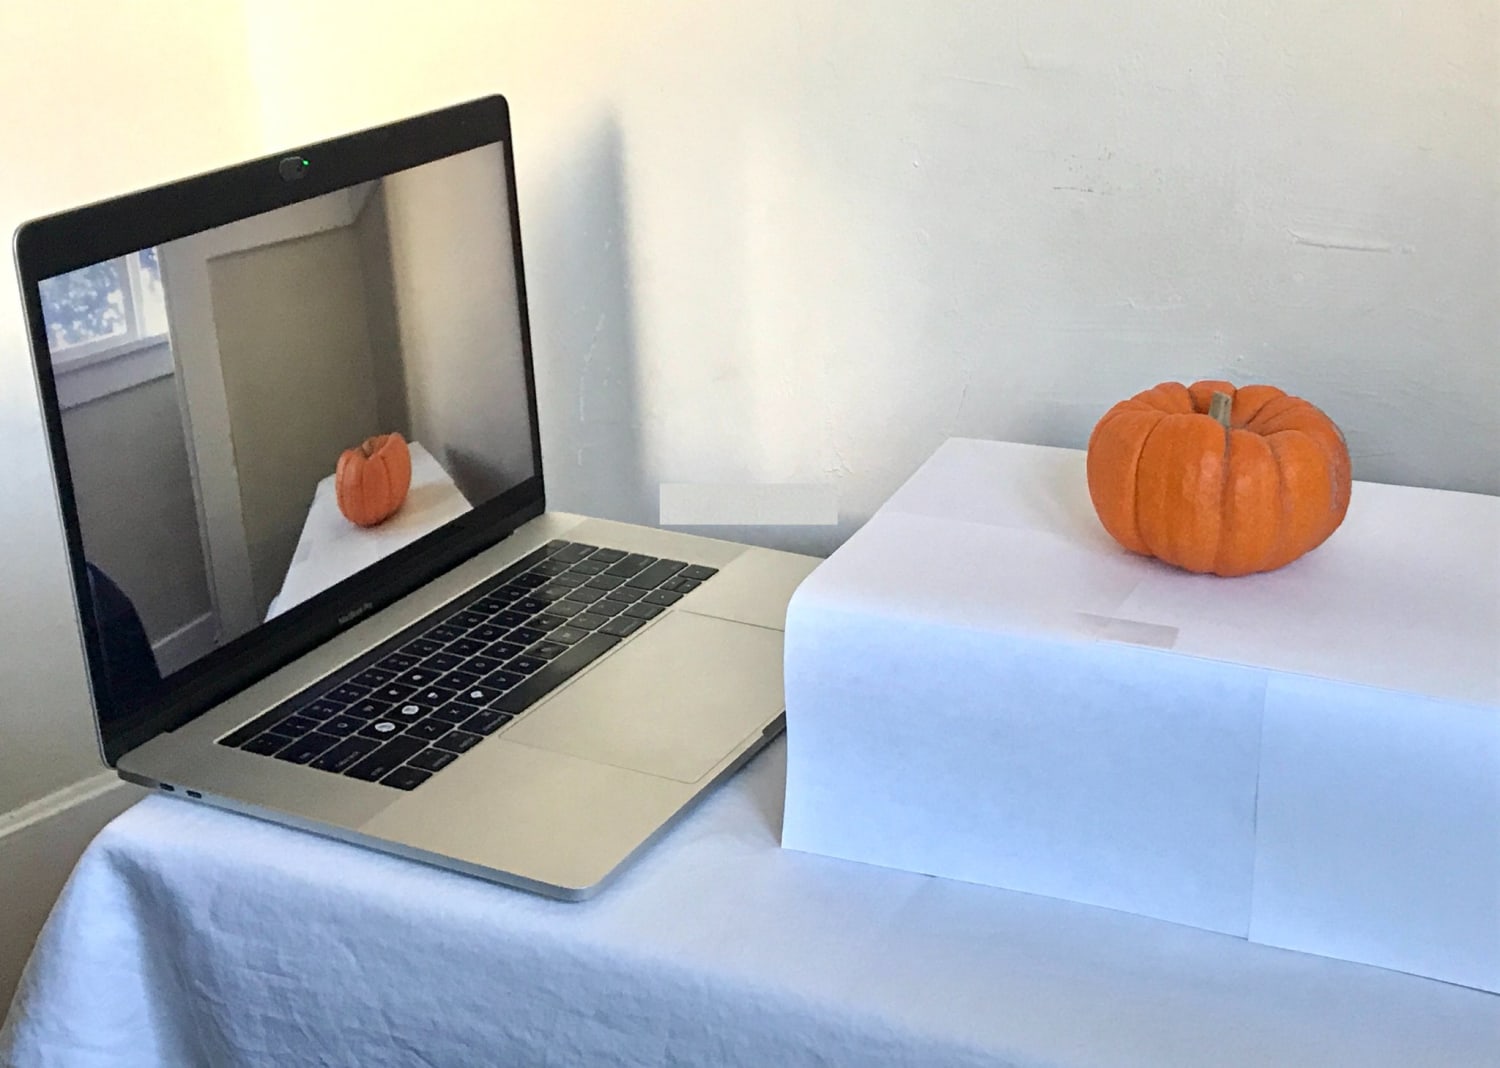 Drumroll please.... introducing the winners of this year's pumpkin contest! Swipe to see all of the smashing contenders made by SFMOMA staff. 1st place entry by Emmy Mickevicius: Zoom Pumpkin Inspired by Nam June Paik's "TV Buddha" (1974)